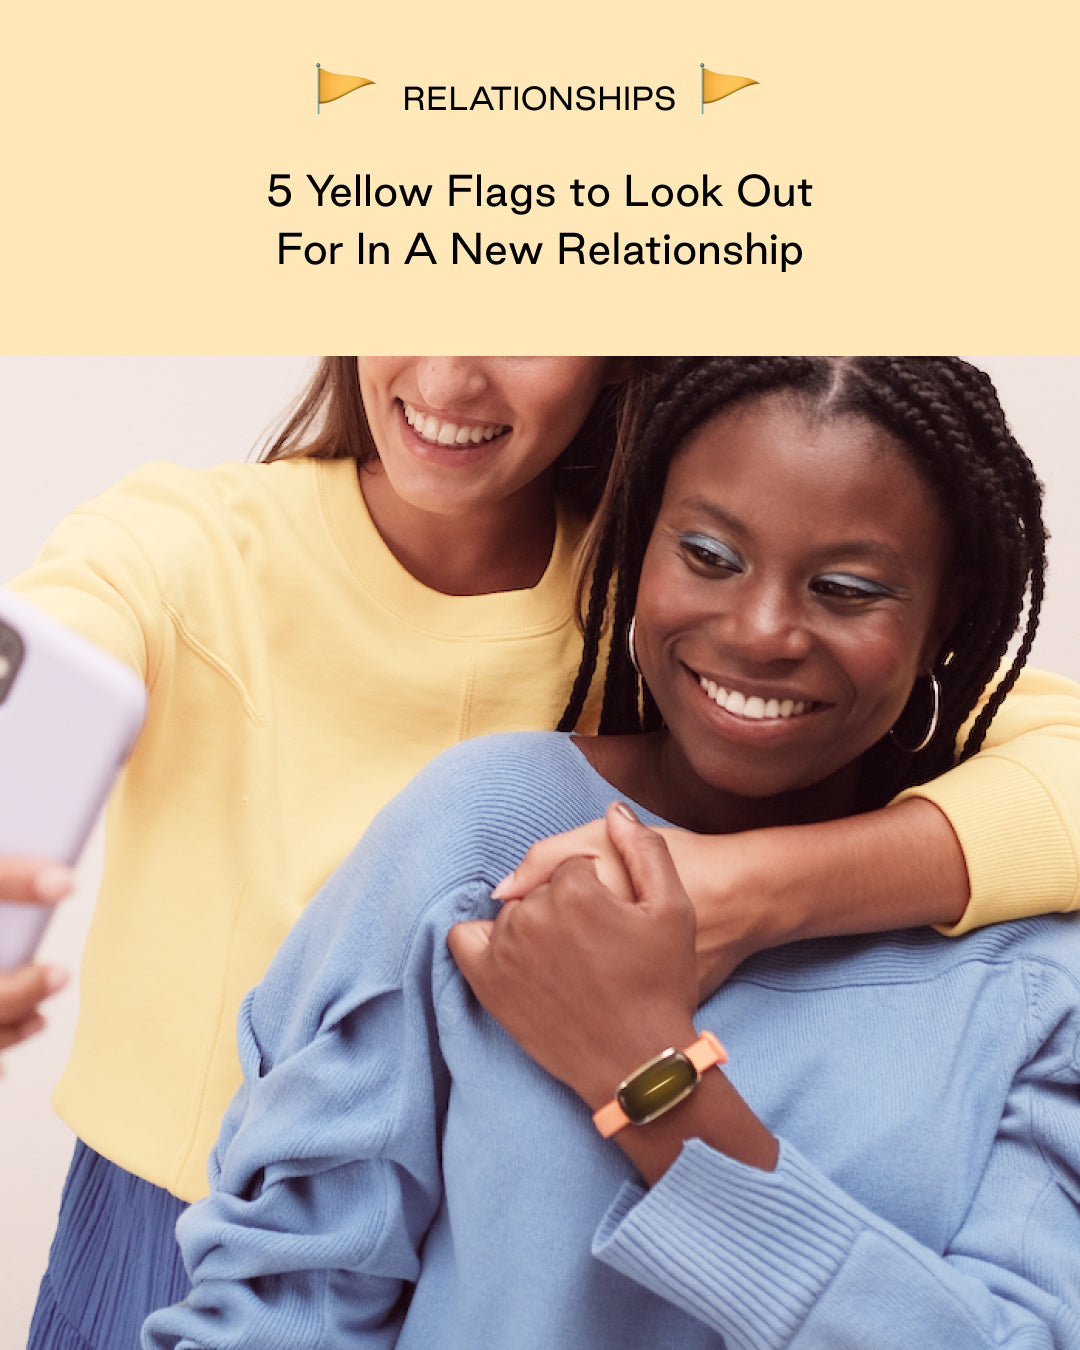 5 Yellow Flags to Look Out For In A New Relationship